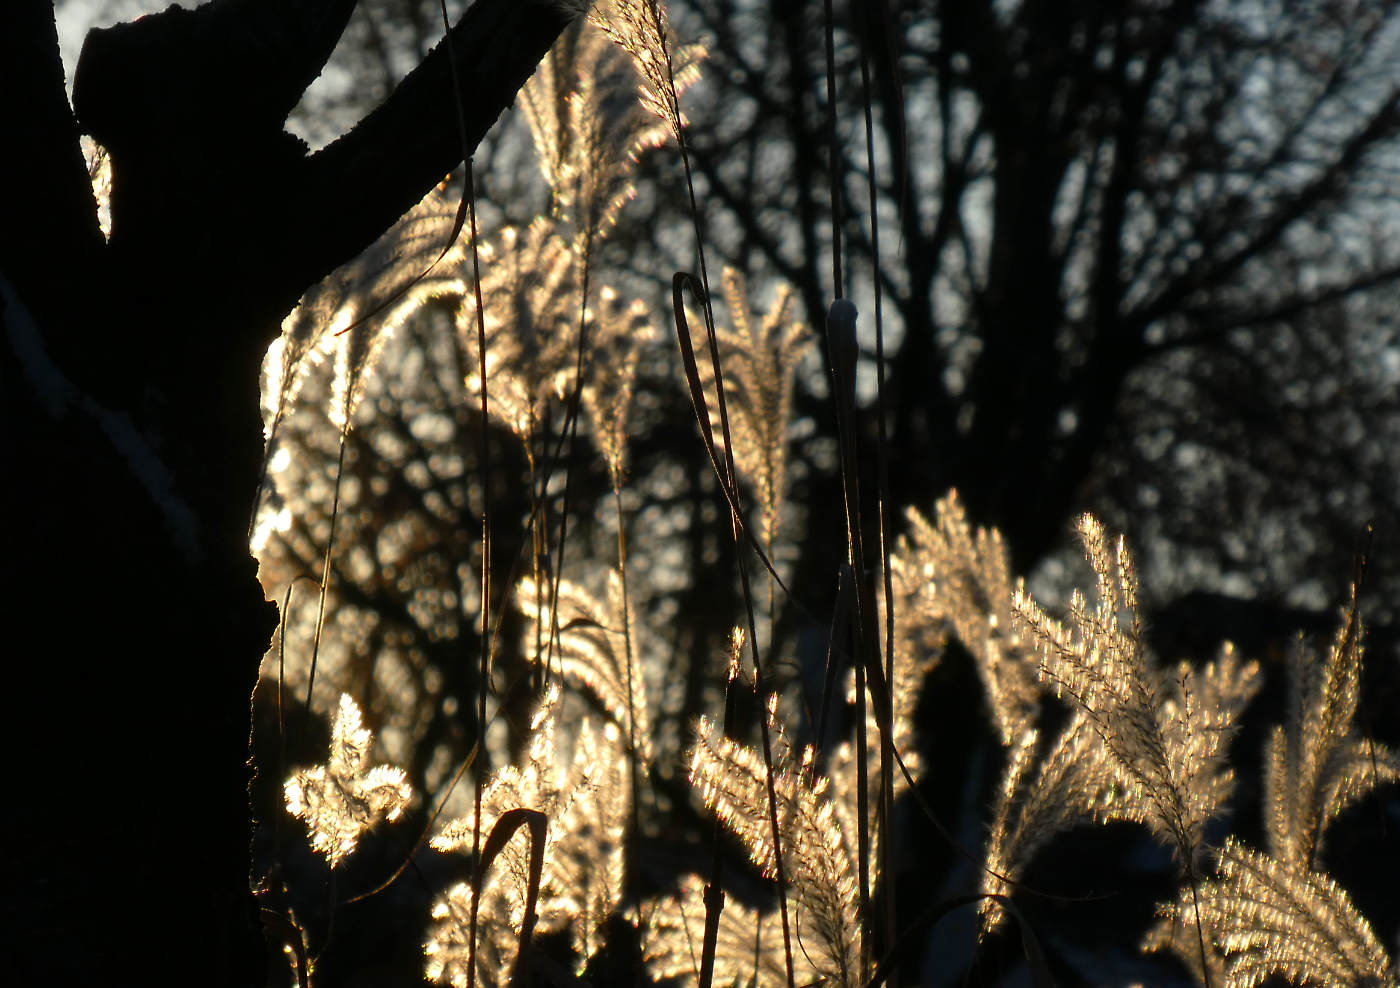 glowing grassy heads on thin stalks backlight in gold light framed by a tree trunk silhouette on left side